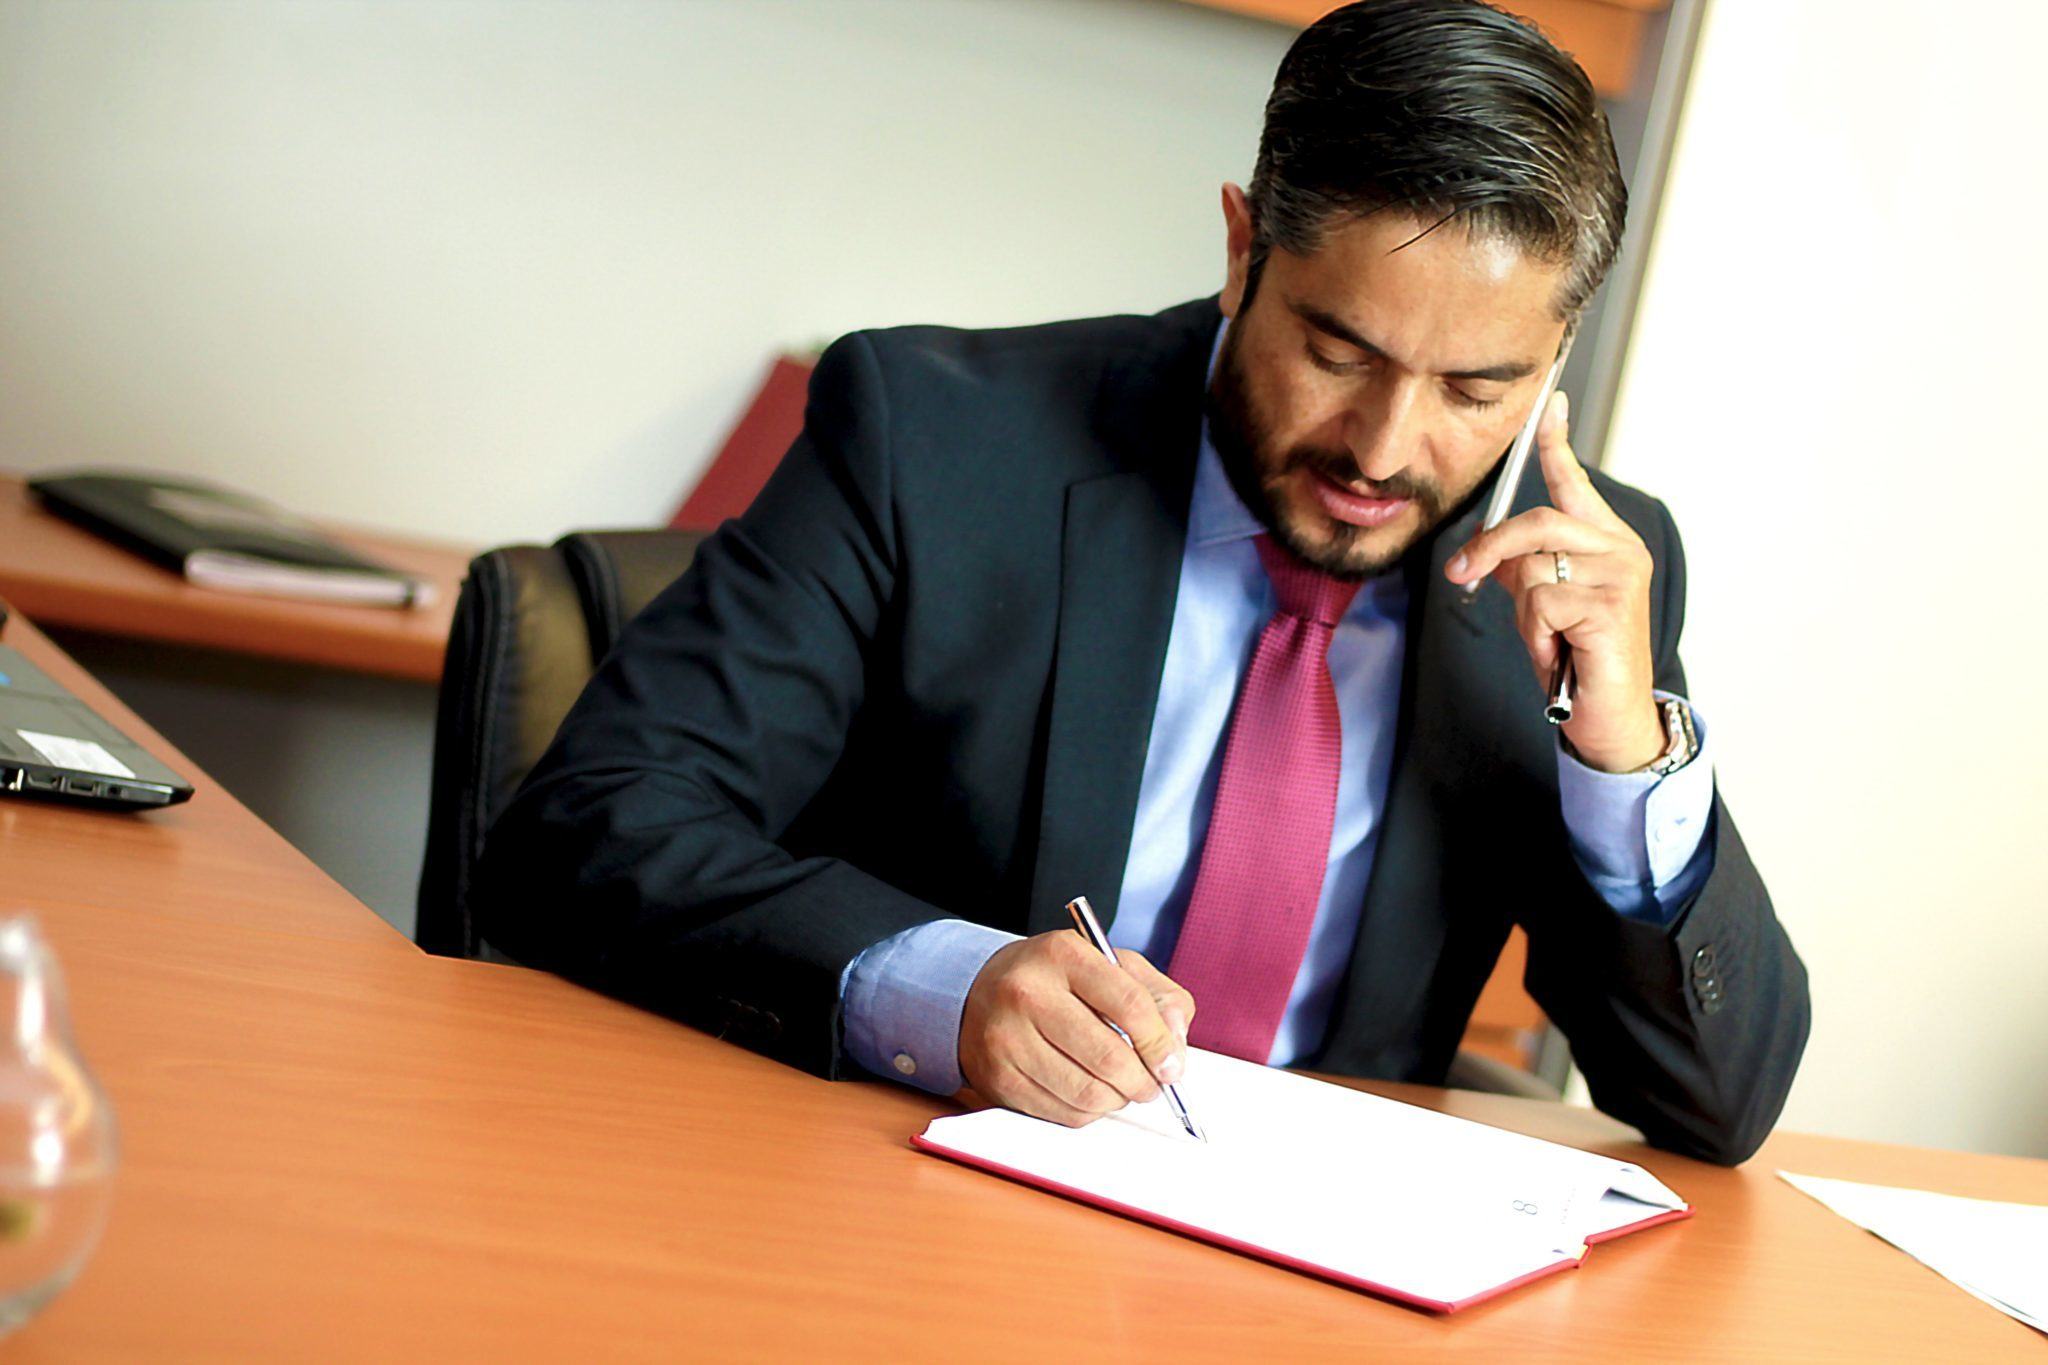 Other factors that increase the cost of CBD include retaining a lawyer, hiring an in-house compliance officer, and the complicated nature of banking and insurance in the hemp and cannabis industries. Photo: A lawyer in a suit and tie writes on a notepad while talking on a smartphone in an office.